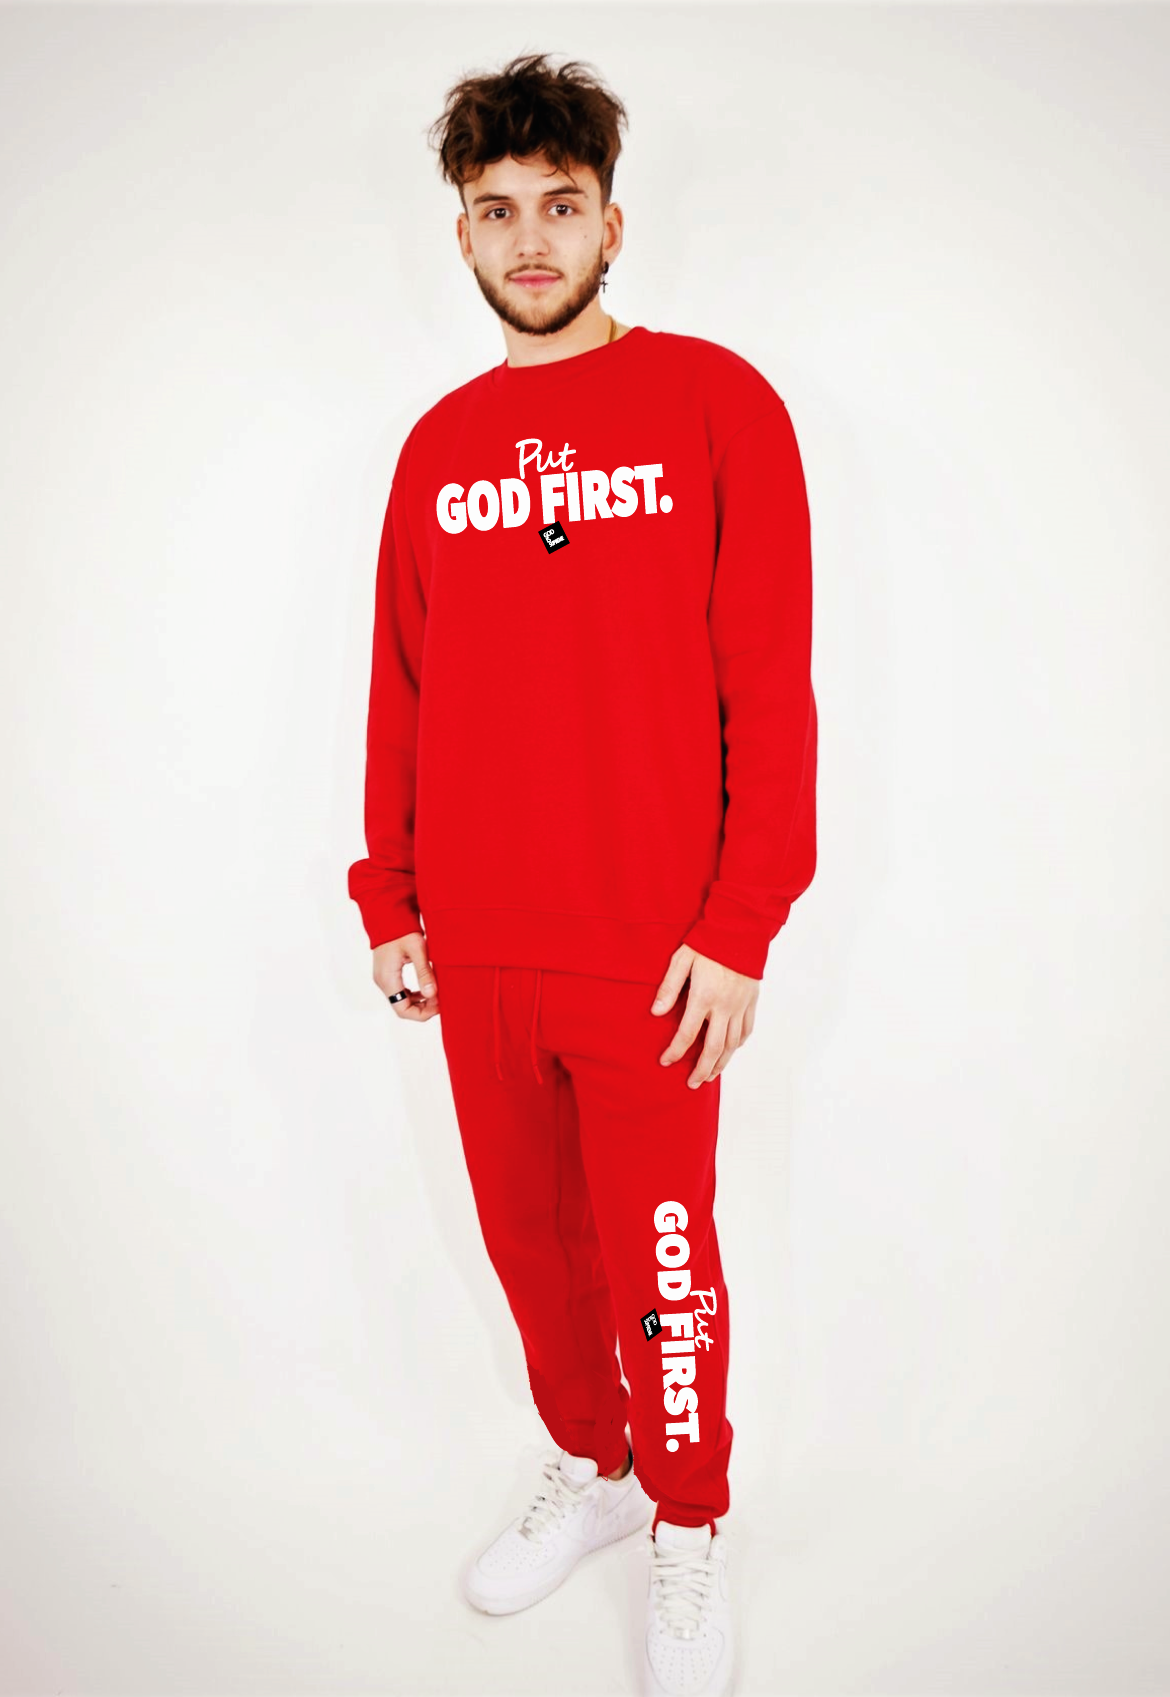 Put God First with Box Logo/Red Sweatpants